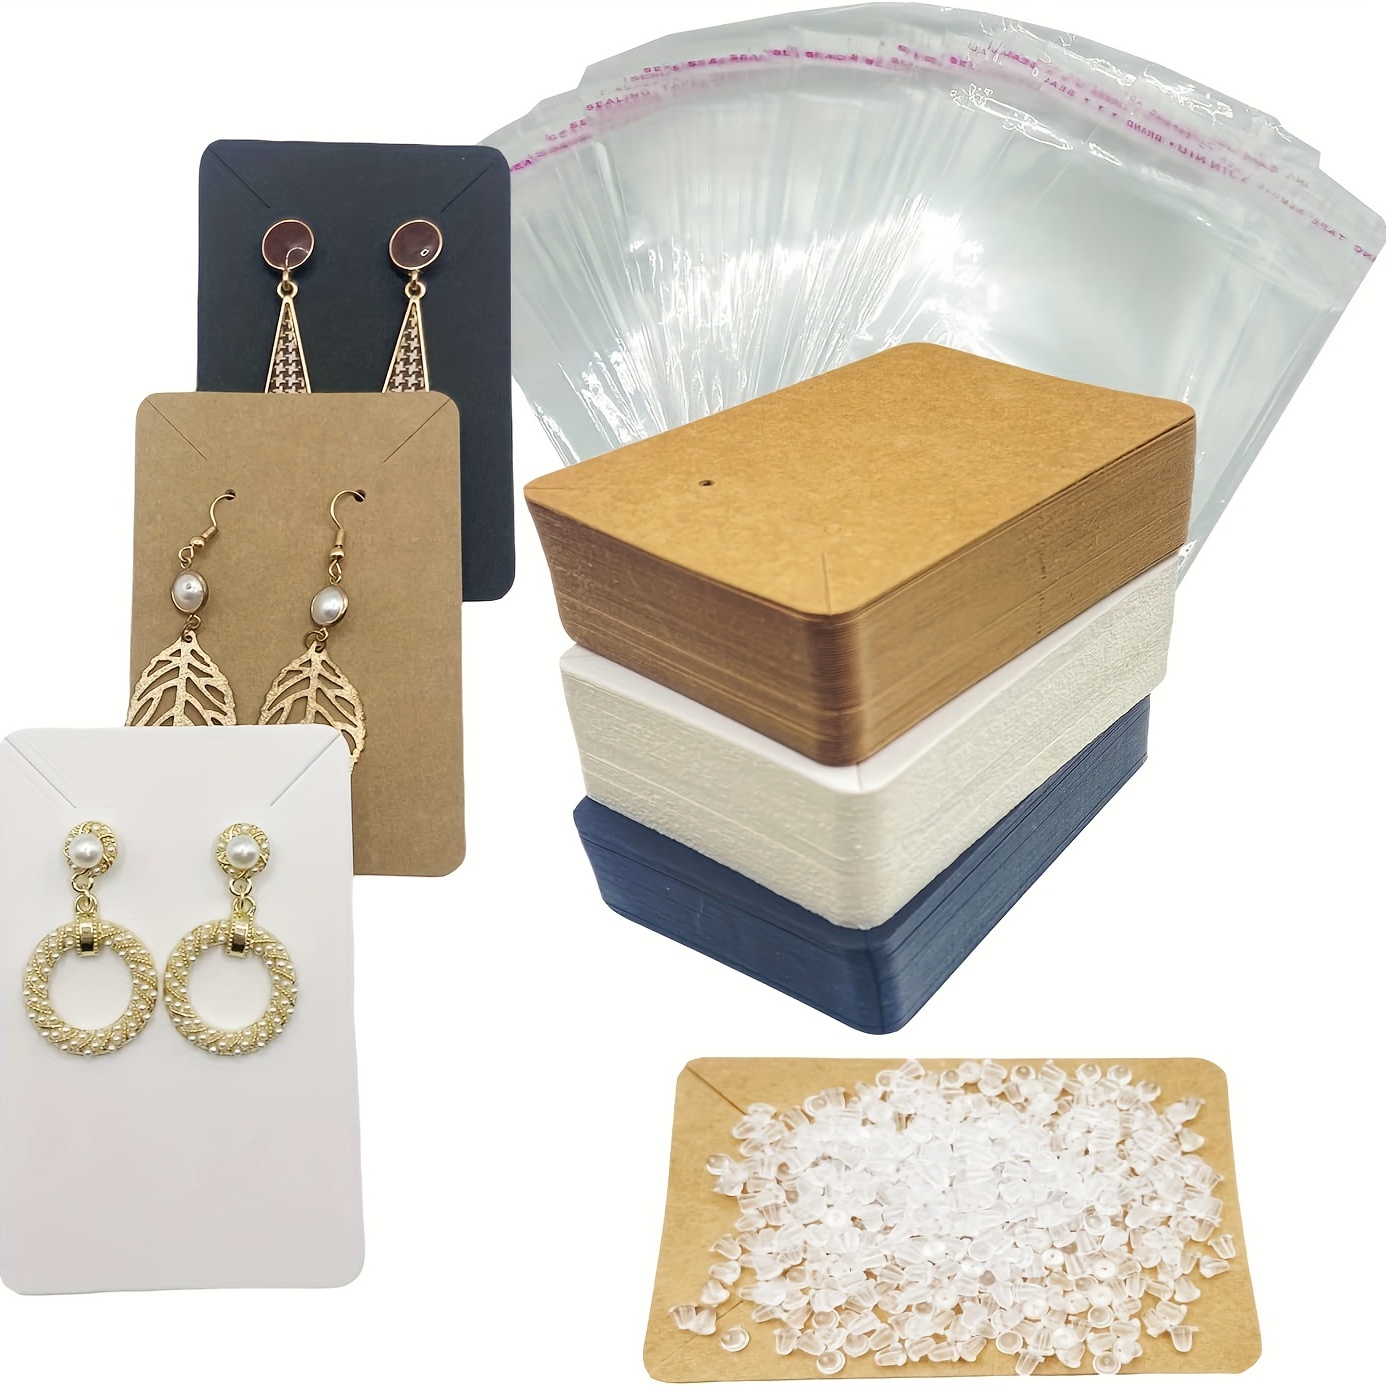  2 x 2.5 Earring Display Cards With Bags Necklace Display  Cards Sets Earring Packing Holder Cards With bags Jewelry Packing For  Earring Necklace Jewelry Packing 100Pack Paper 100Pack Bags : Clothing